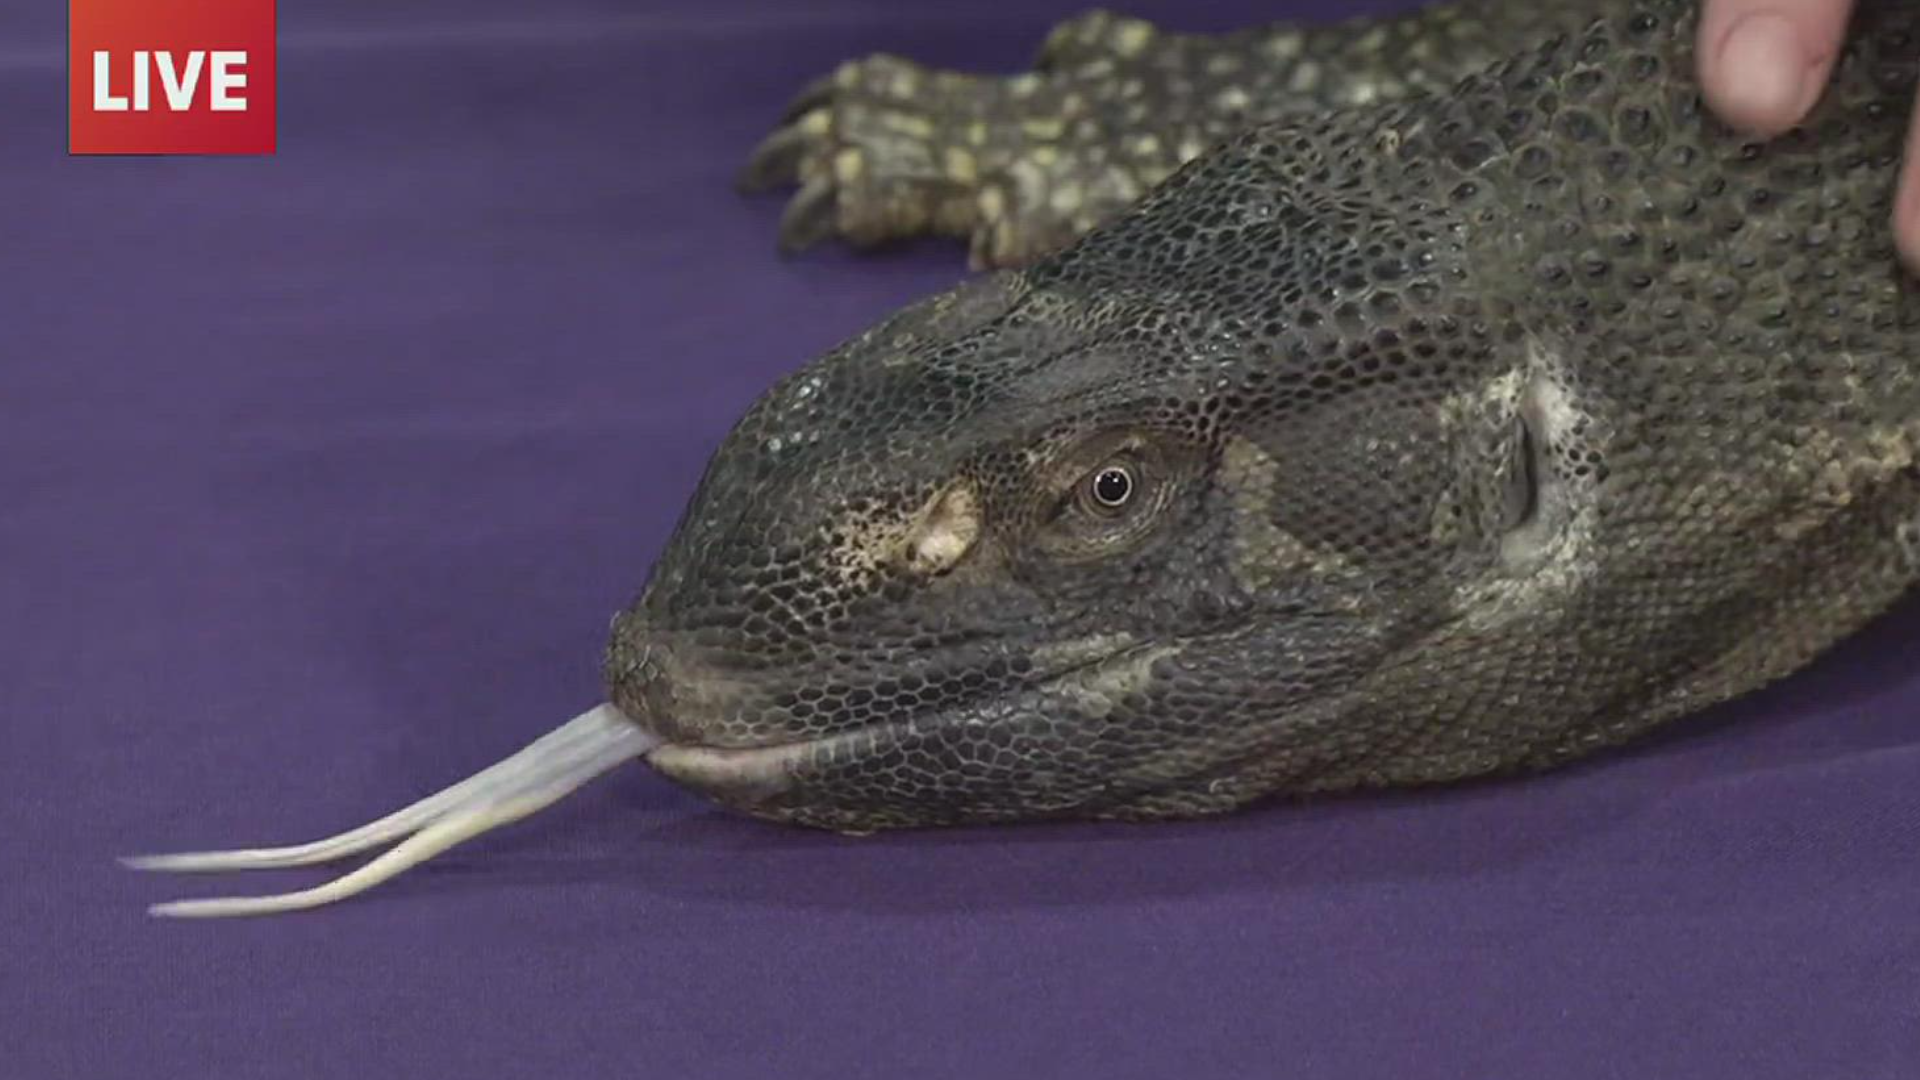 The HERPS Exotic Reptile and Pet Show will be fun for the whole family.